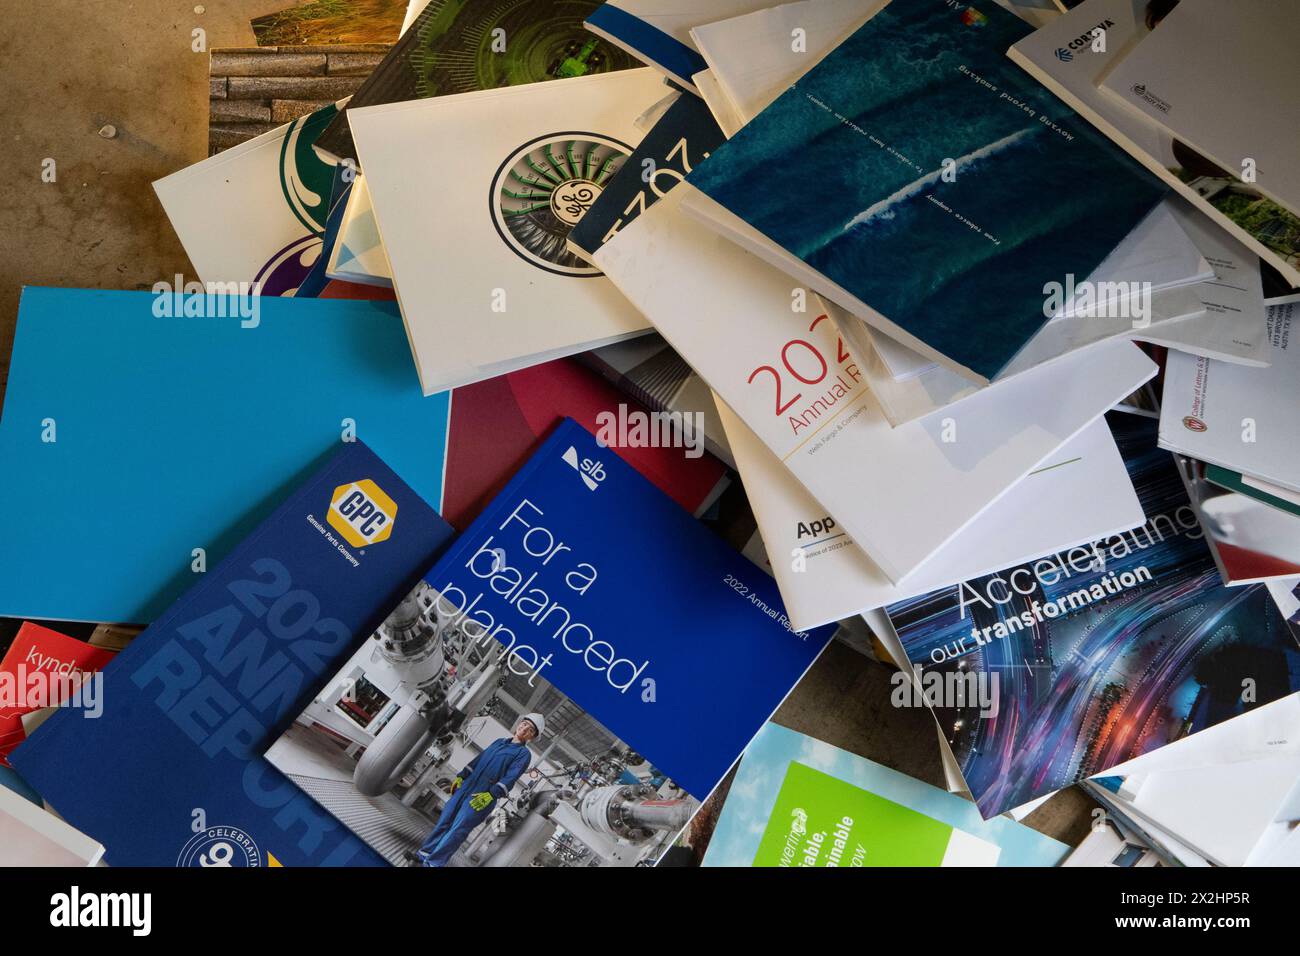 A pile of mostly unread corporate annual reports overflow from a household trash bin in Austin, Texas. Many corporations have scaled back costly annual report deliveries, opting for online access to shareholders who don't want or need an expensive paper copy. Stock Photo